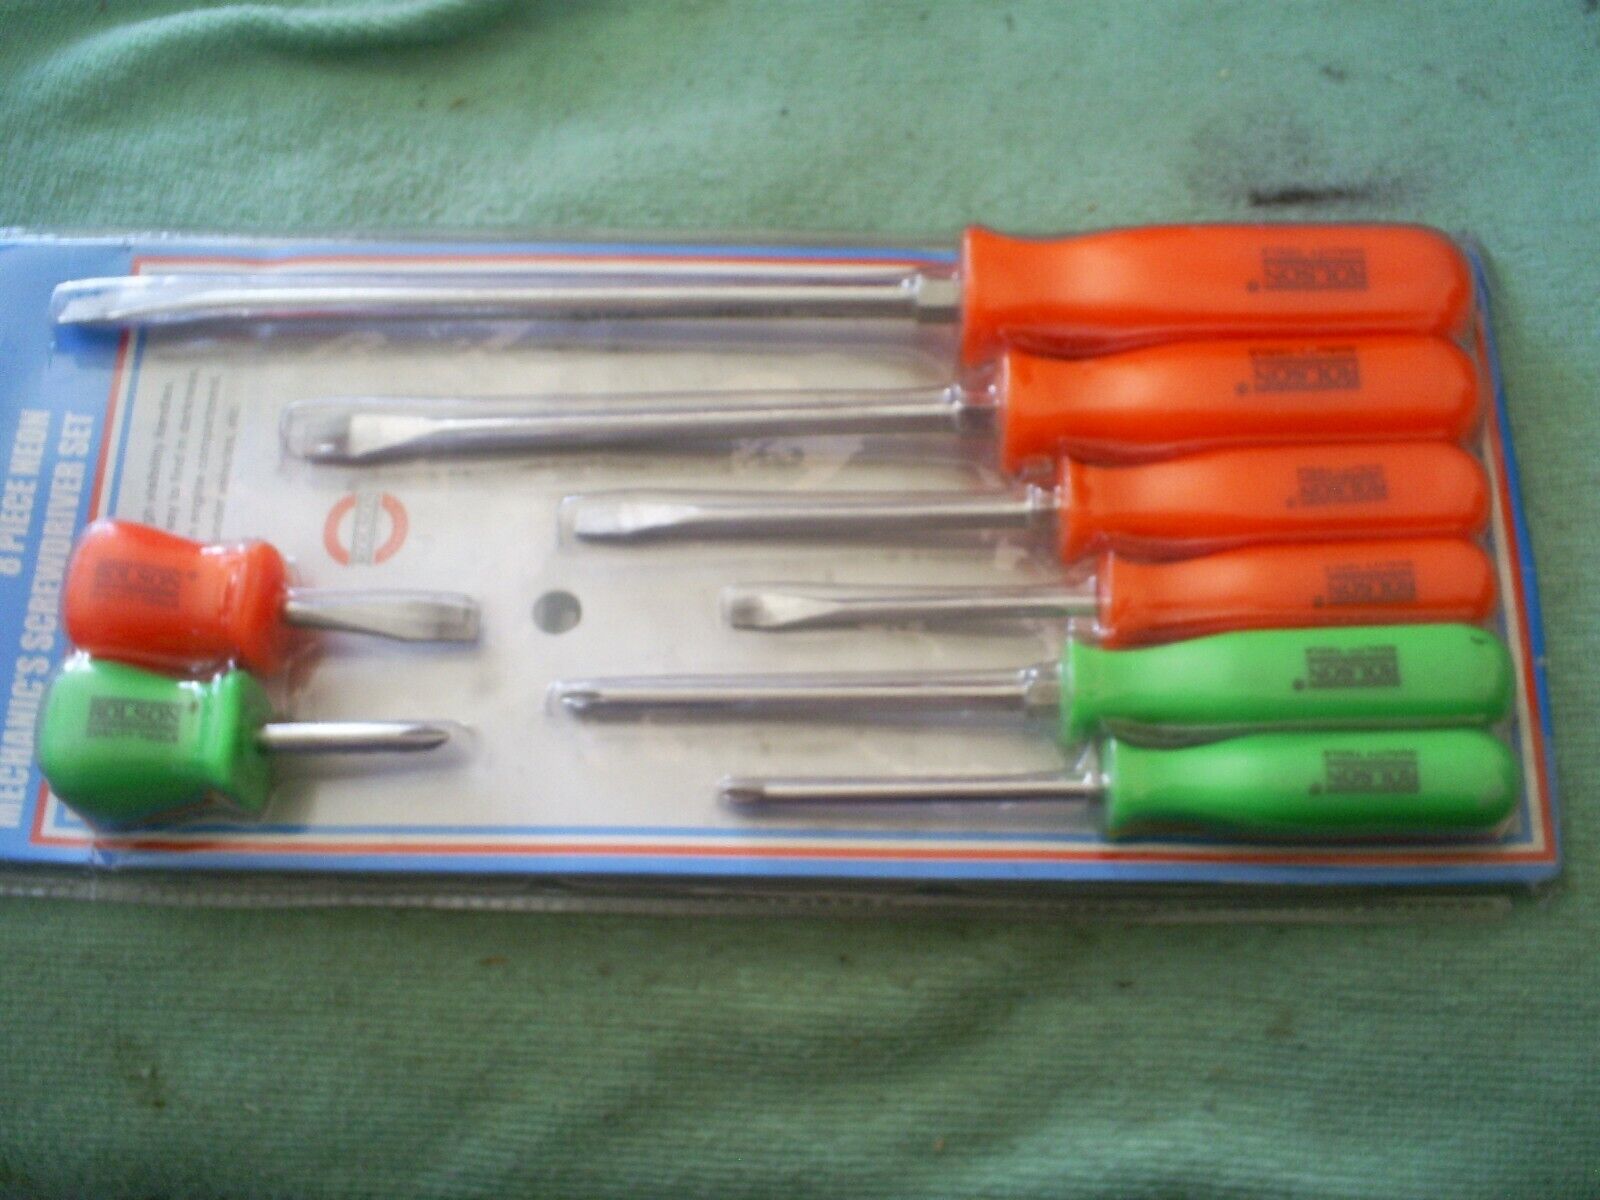 SCREWDRIVER SET 8 PIECE ENGINEERS HI VIS WITH HEX BOLSTERS AND MAGNETIC TIPS